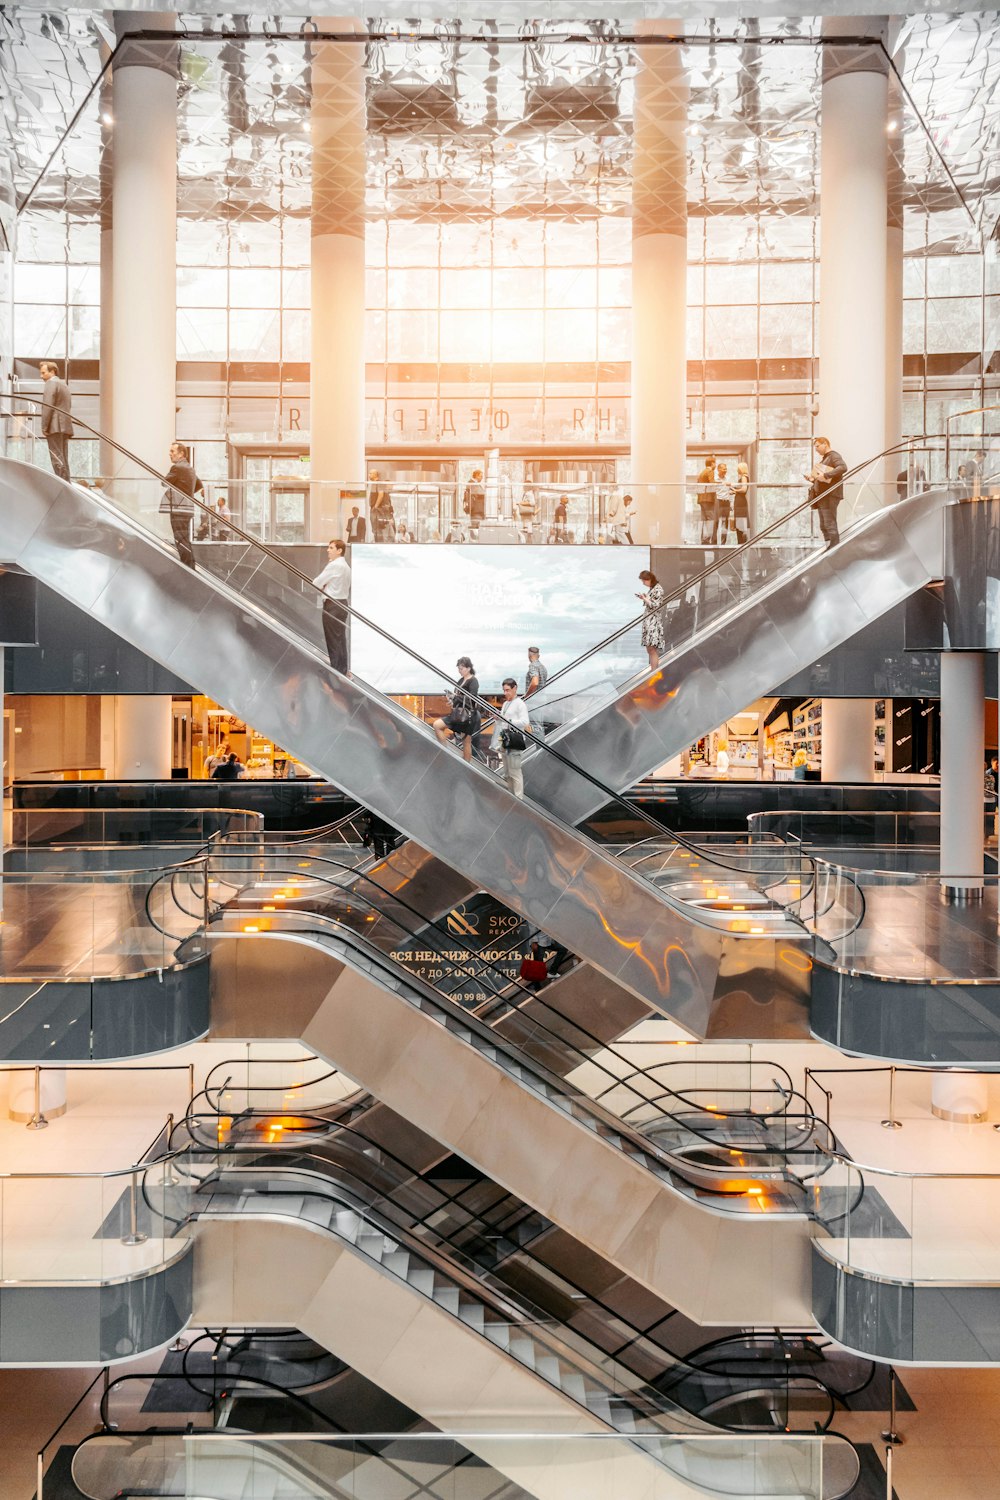 750+ Shopping Mall Pictures | Download Free Images on Unsplash